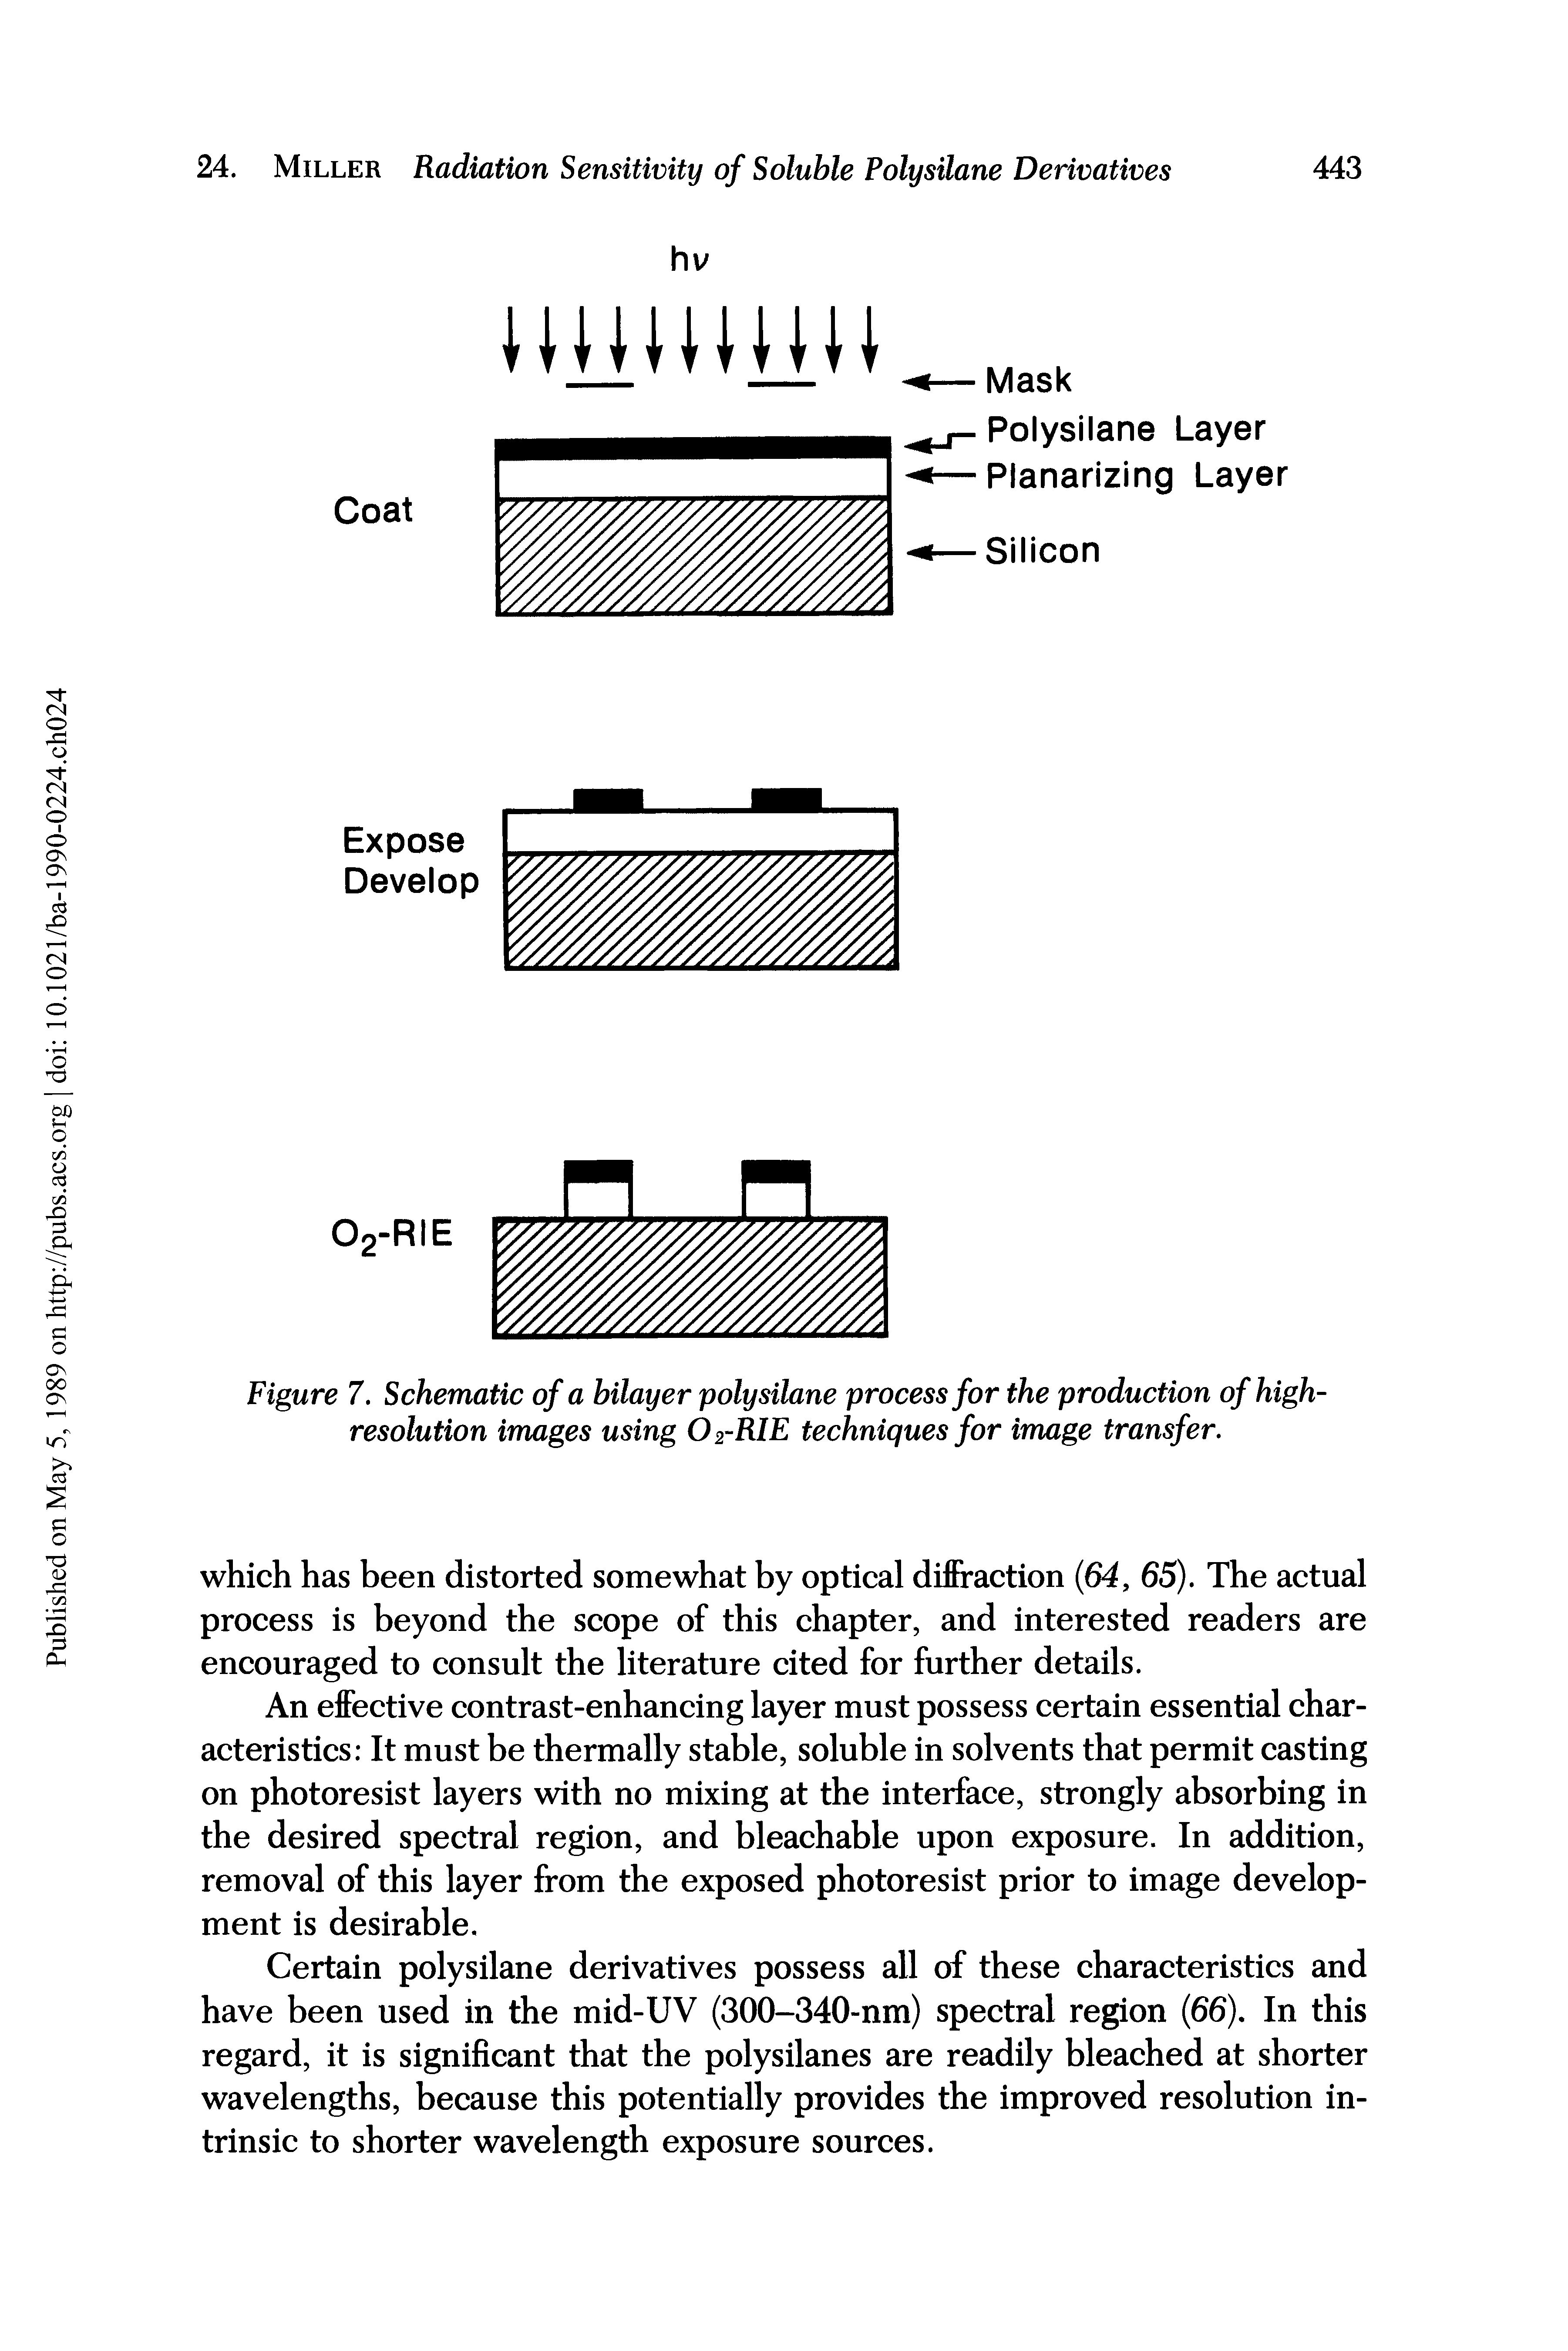 Figure 7, Schematic of a bilayer poly silane process for the production of high-resolution images using O 2-RIE techniques for image transfer.